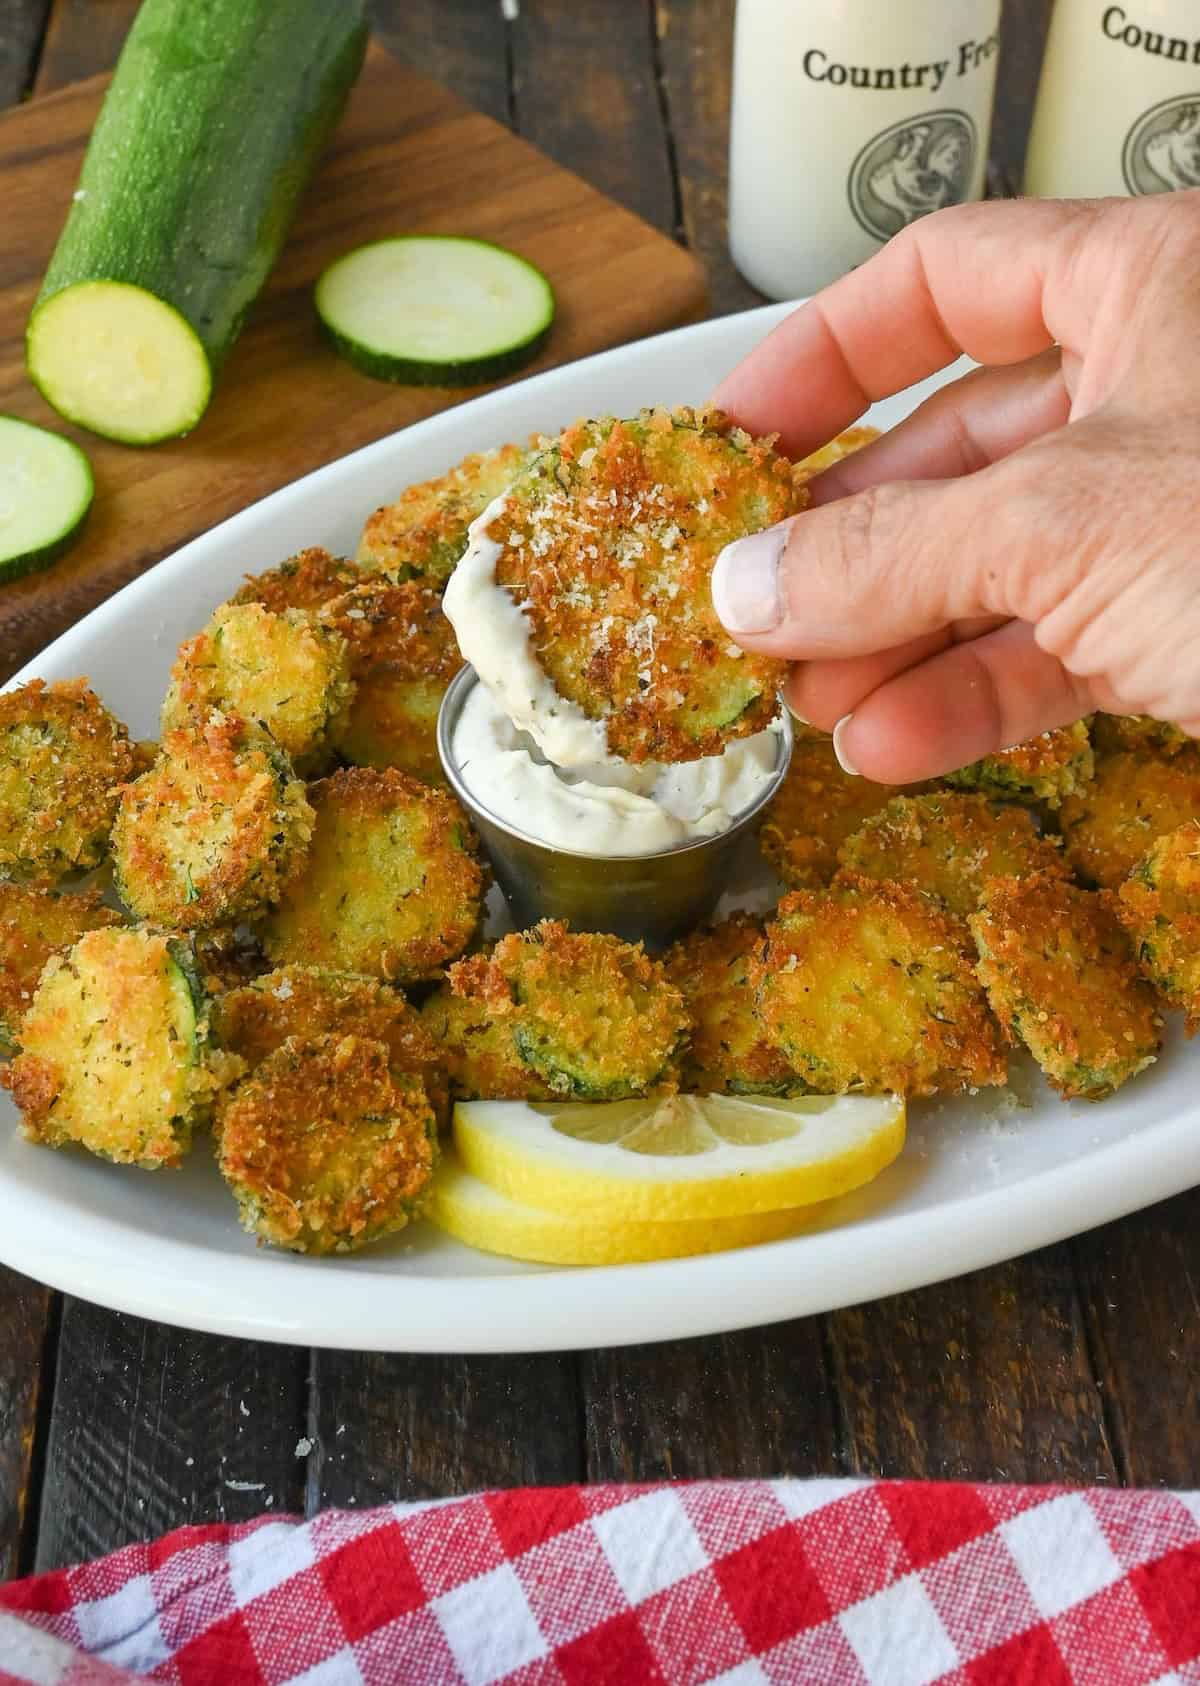 A zucchini crisp being dipped into ranch.